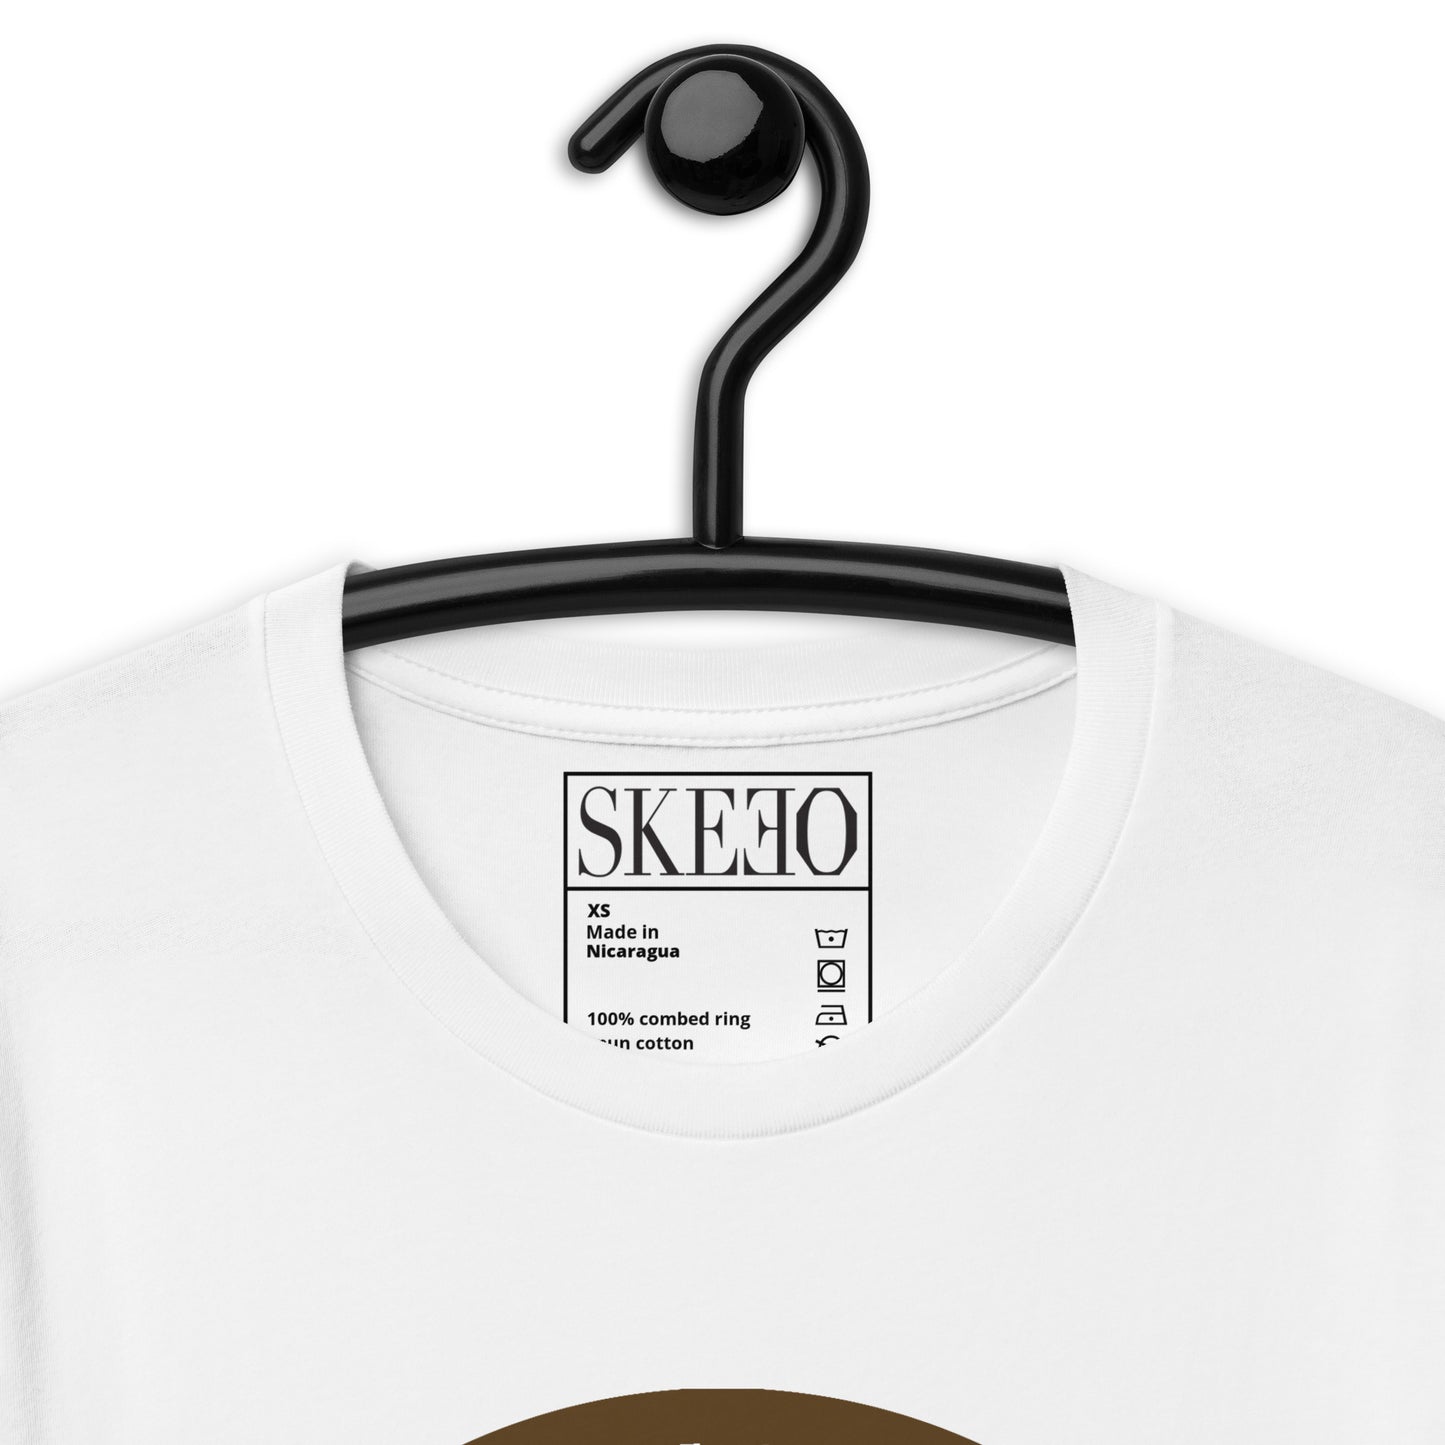 SK Brown/White All Over t-shirt